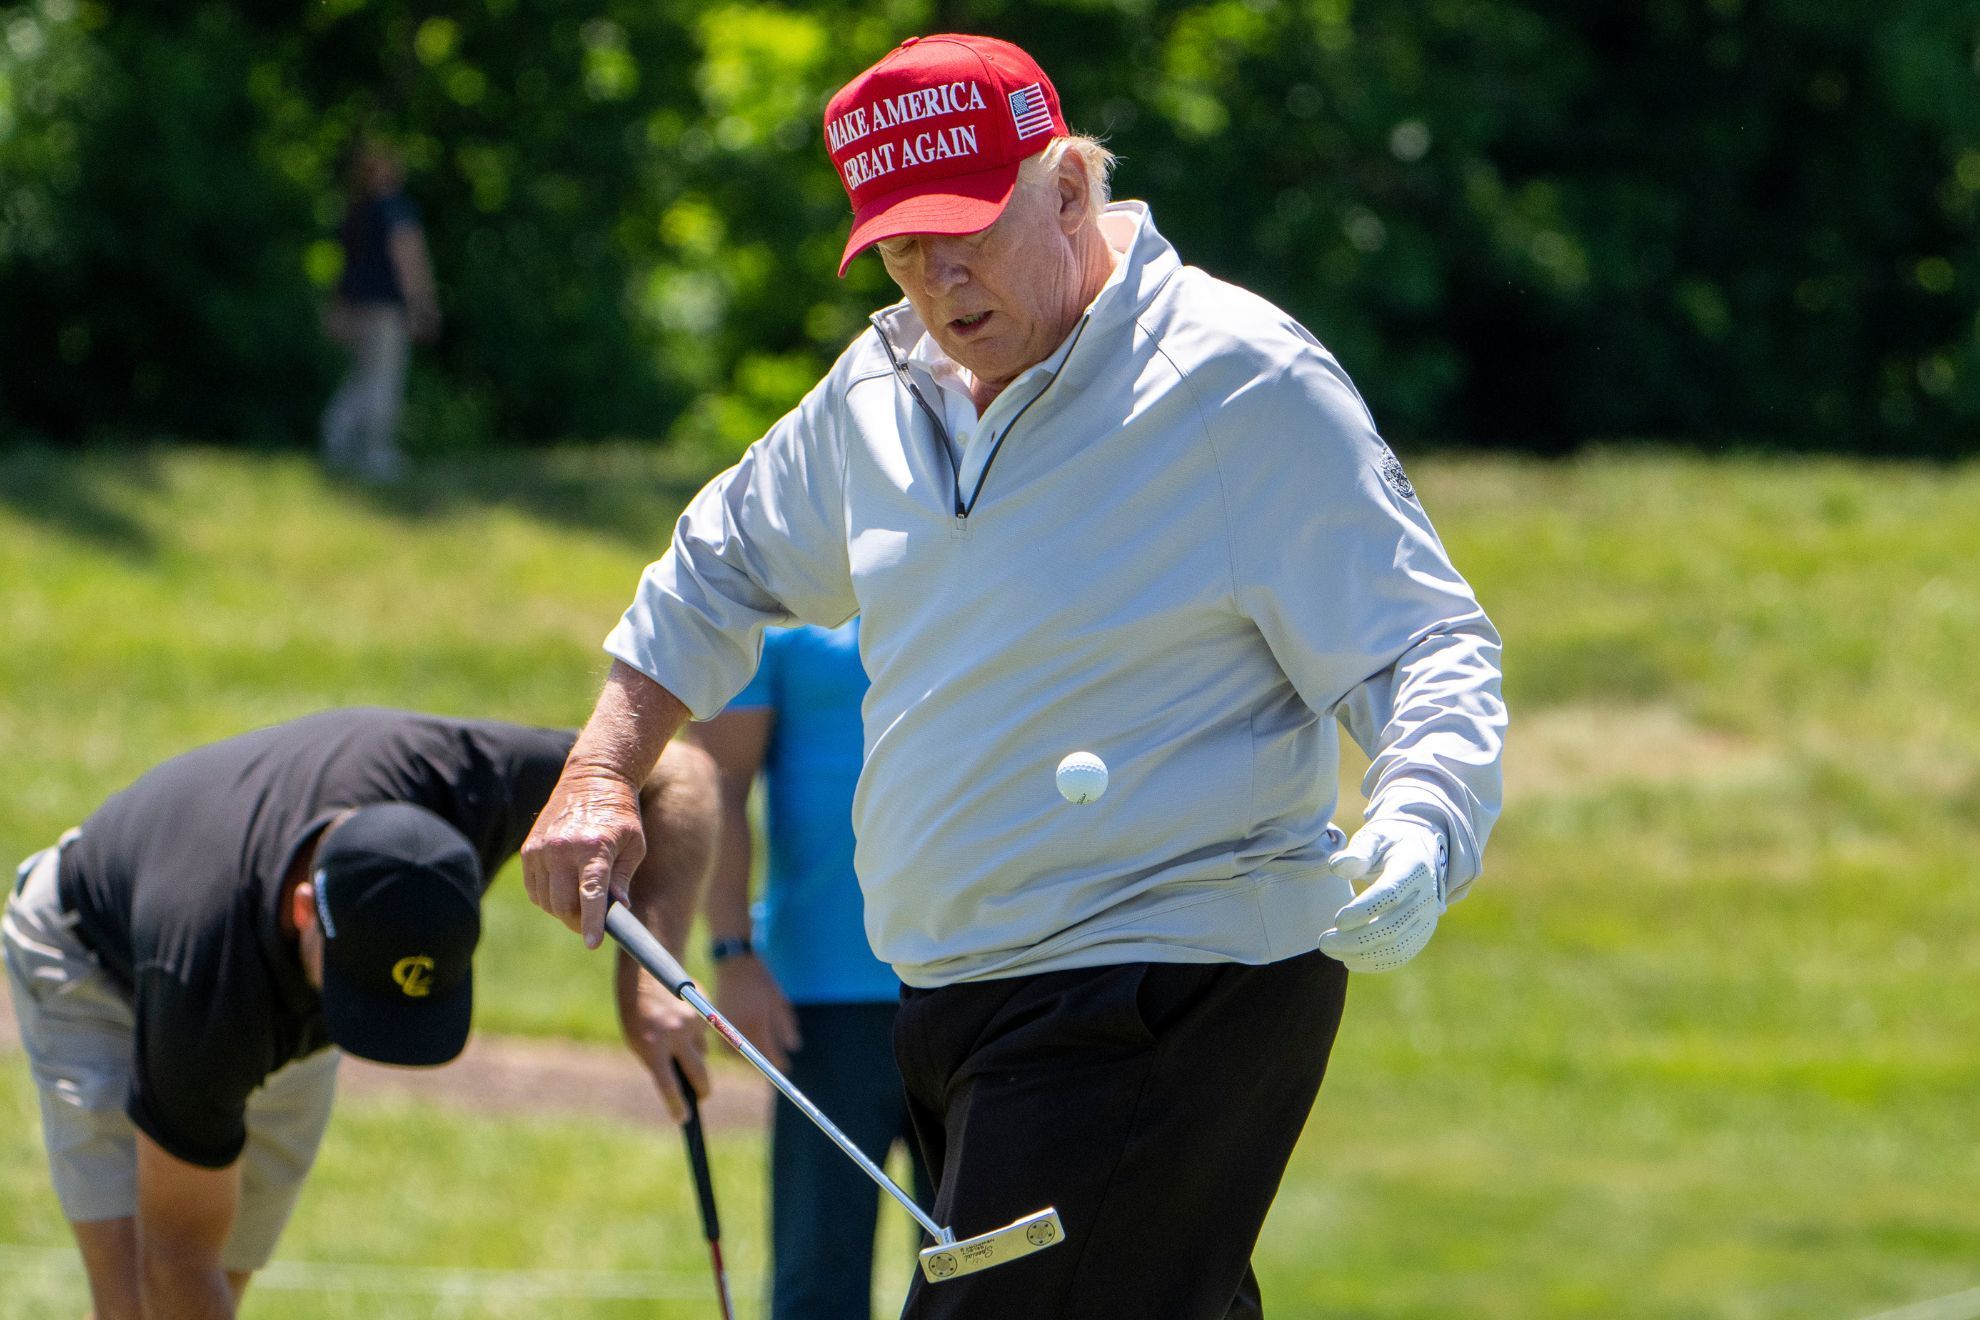 Donald Trump assures no foul play after beating Phil Mickelson's golf score